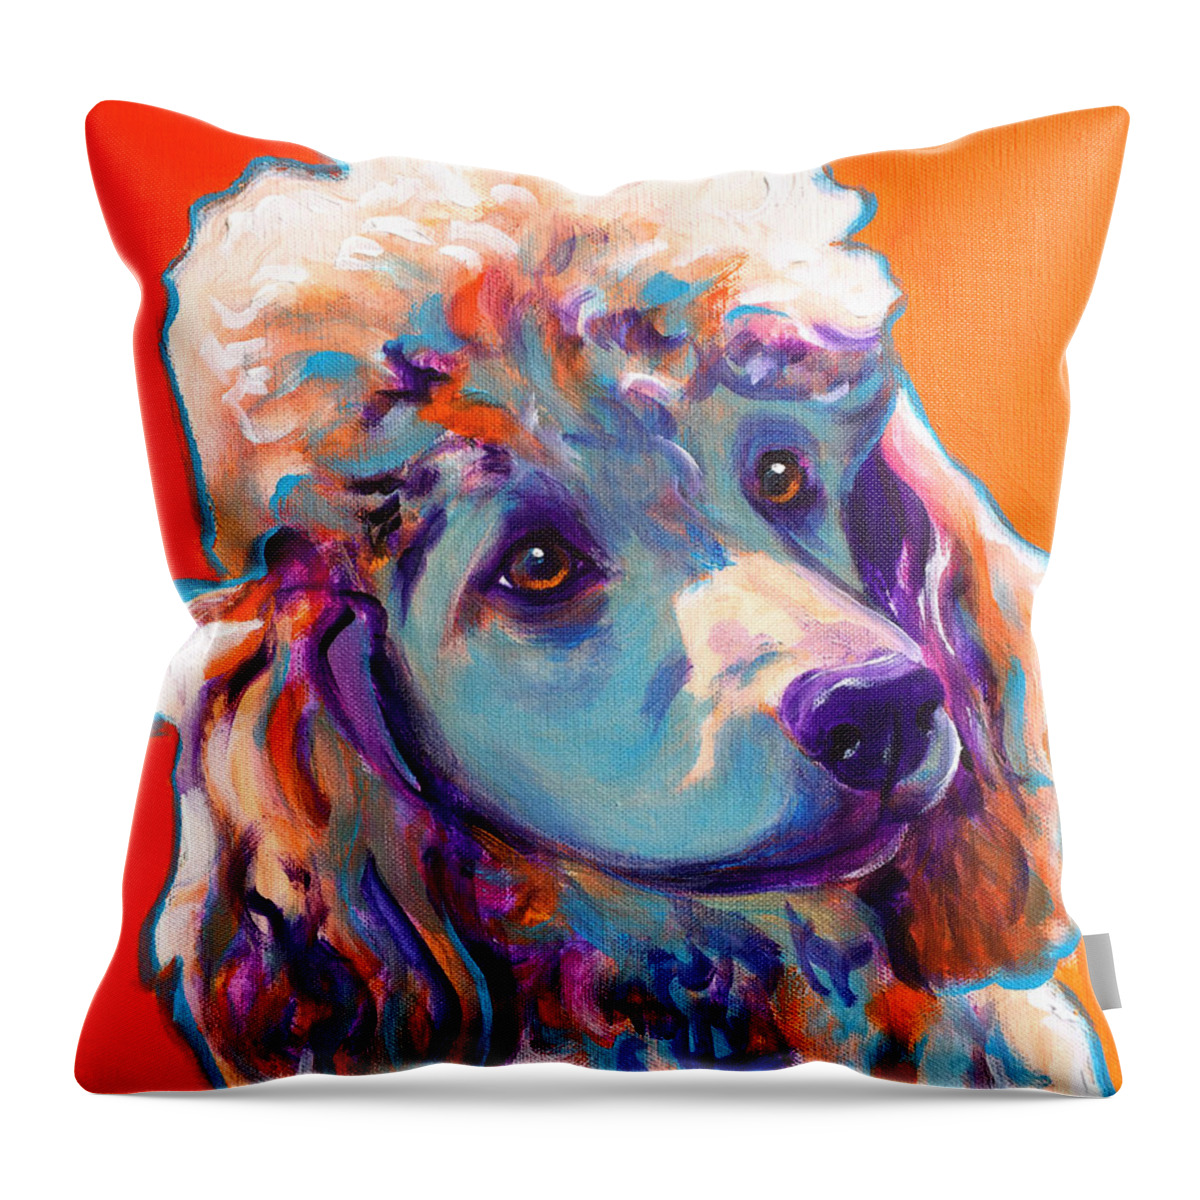 Poodle Throw Pillow featuring the painting Poodle - Bonnie by Dawg Painter